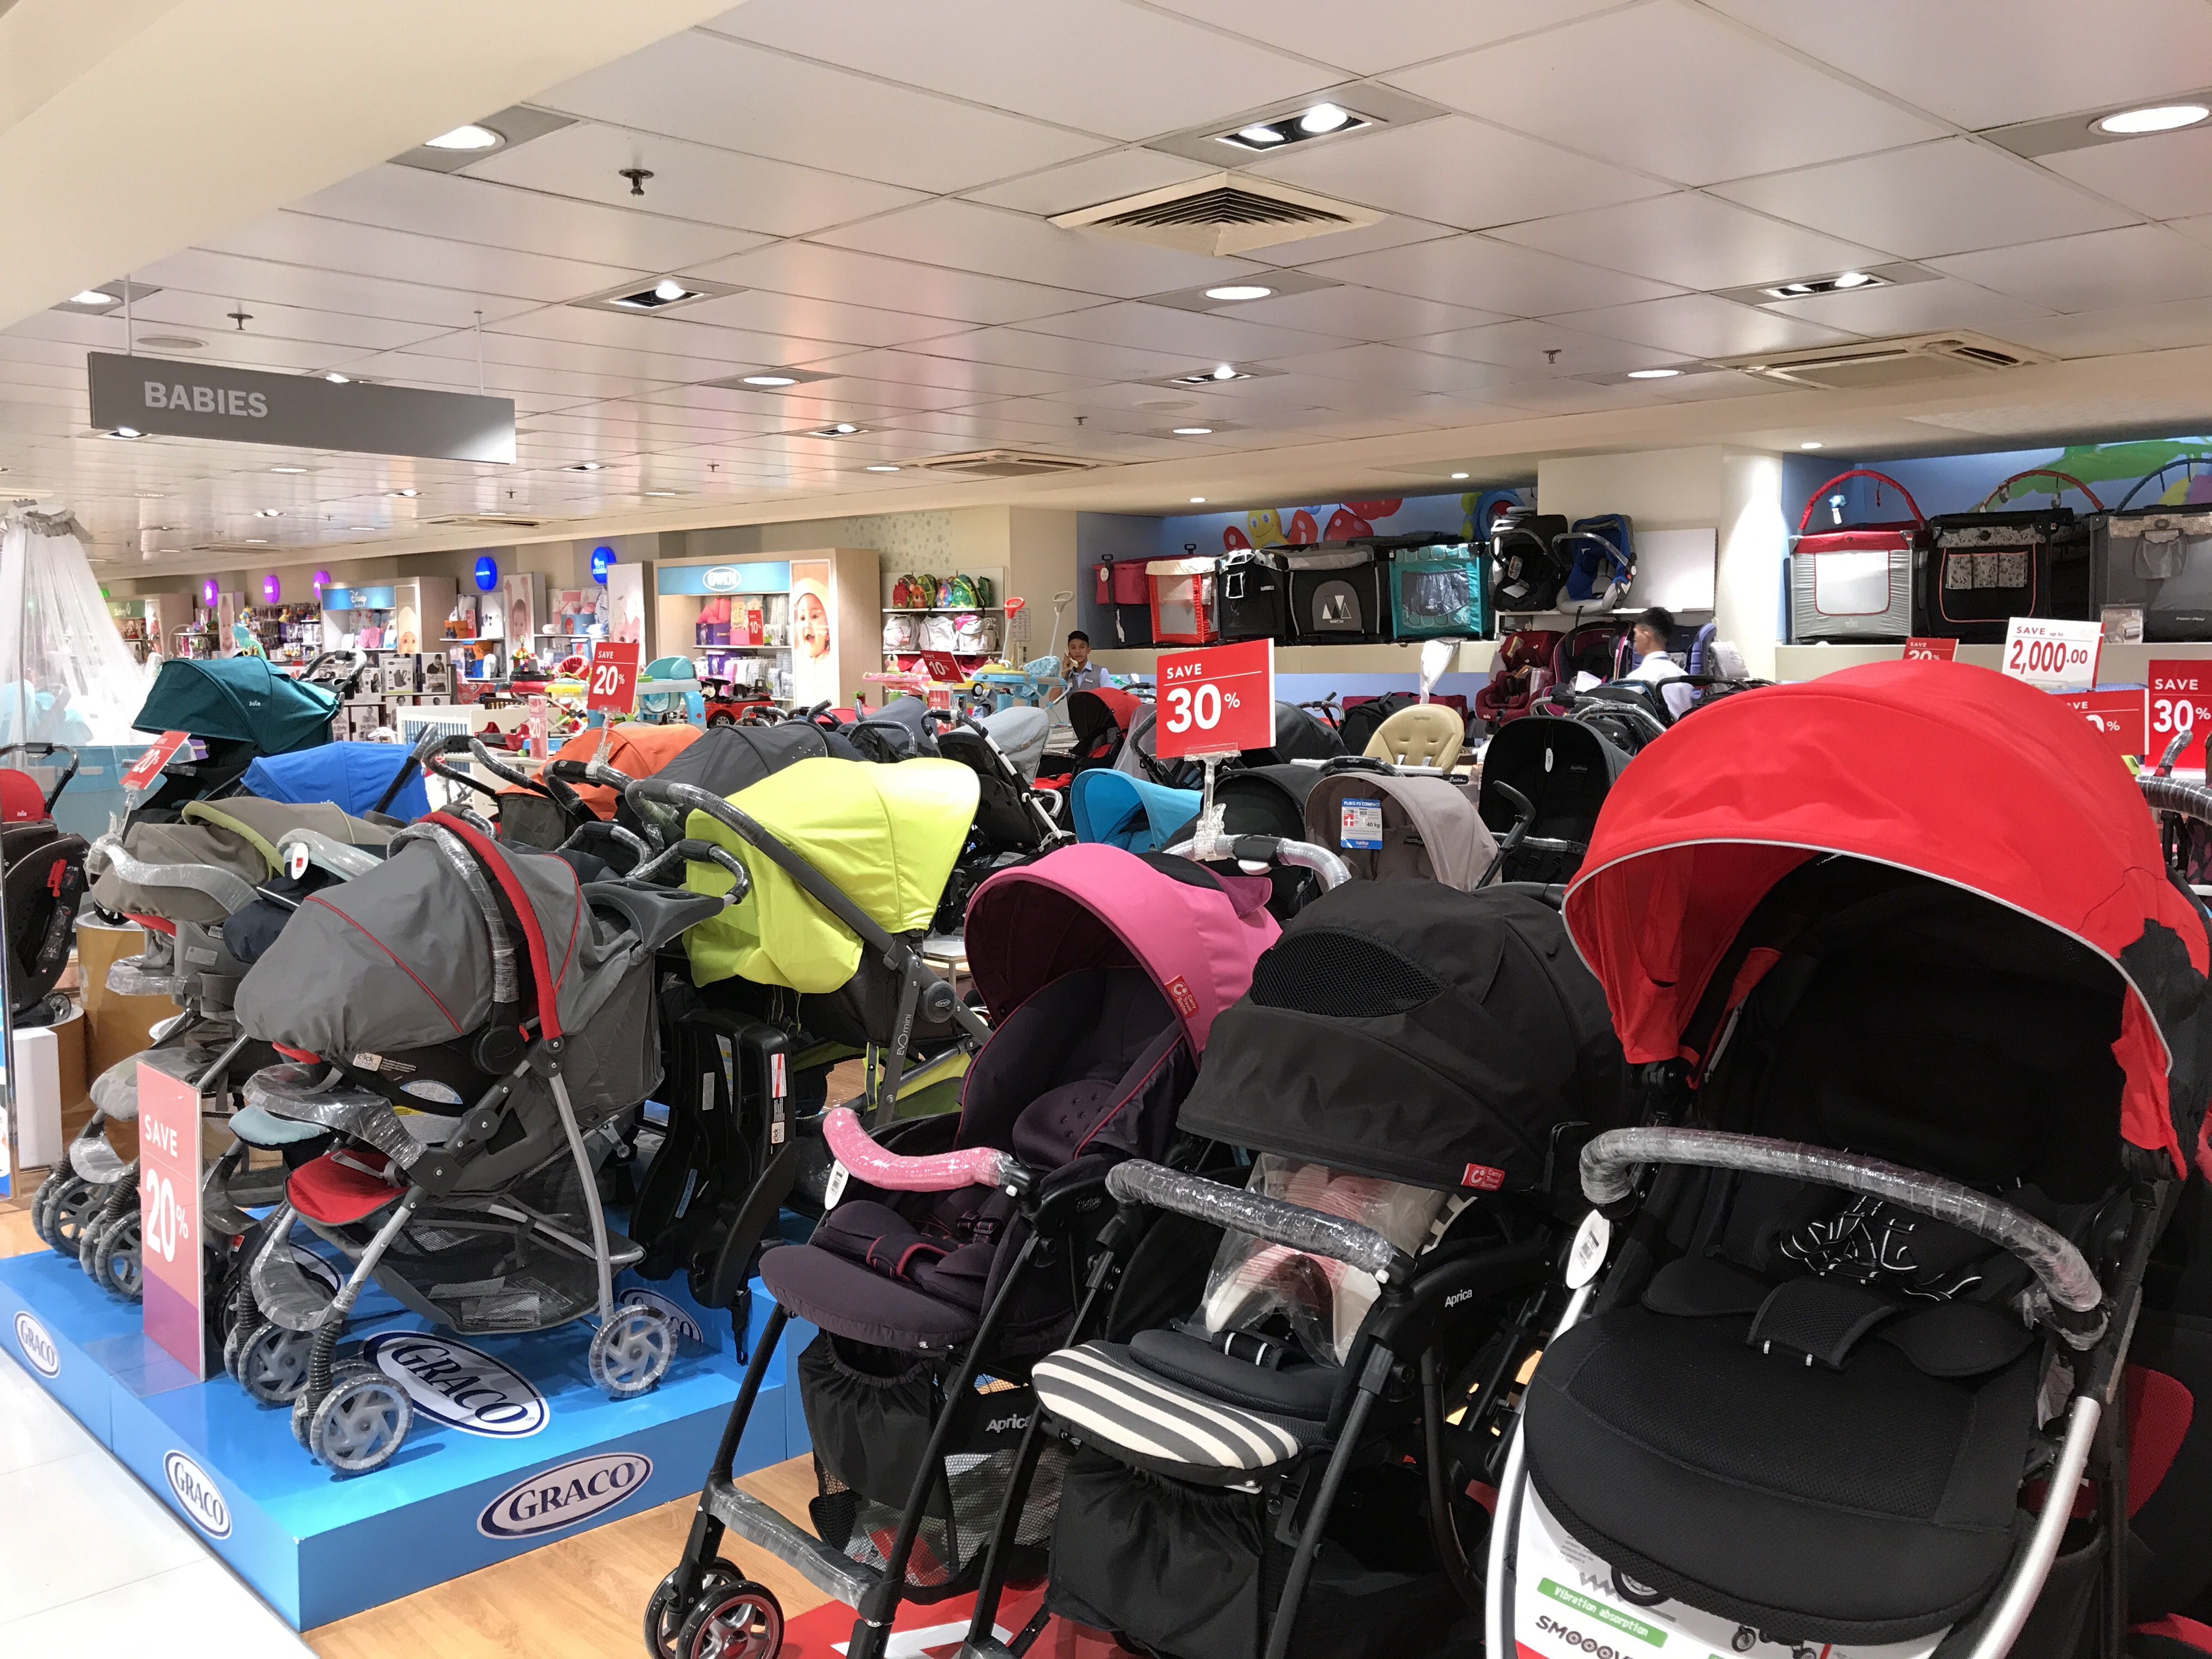 stroller price at sm department store